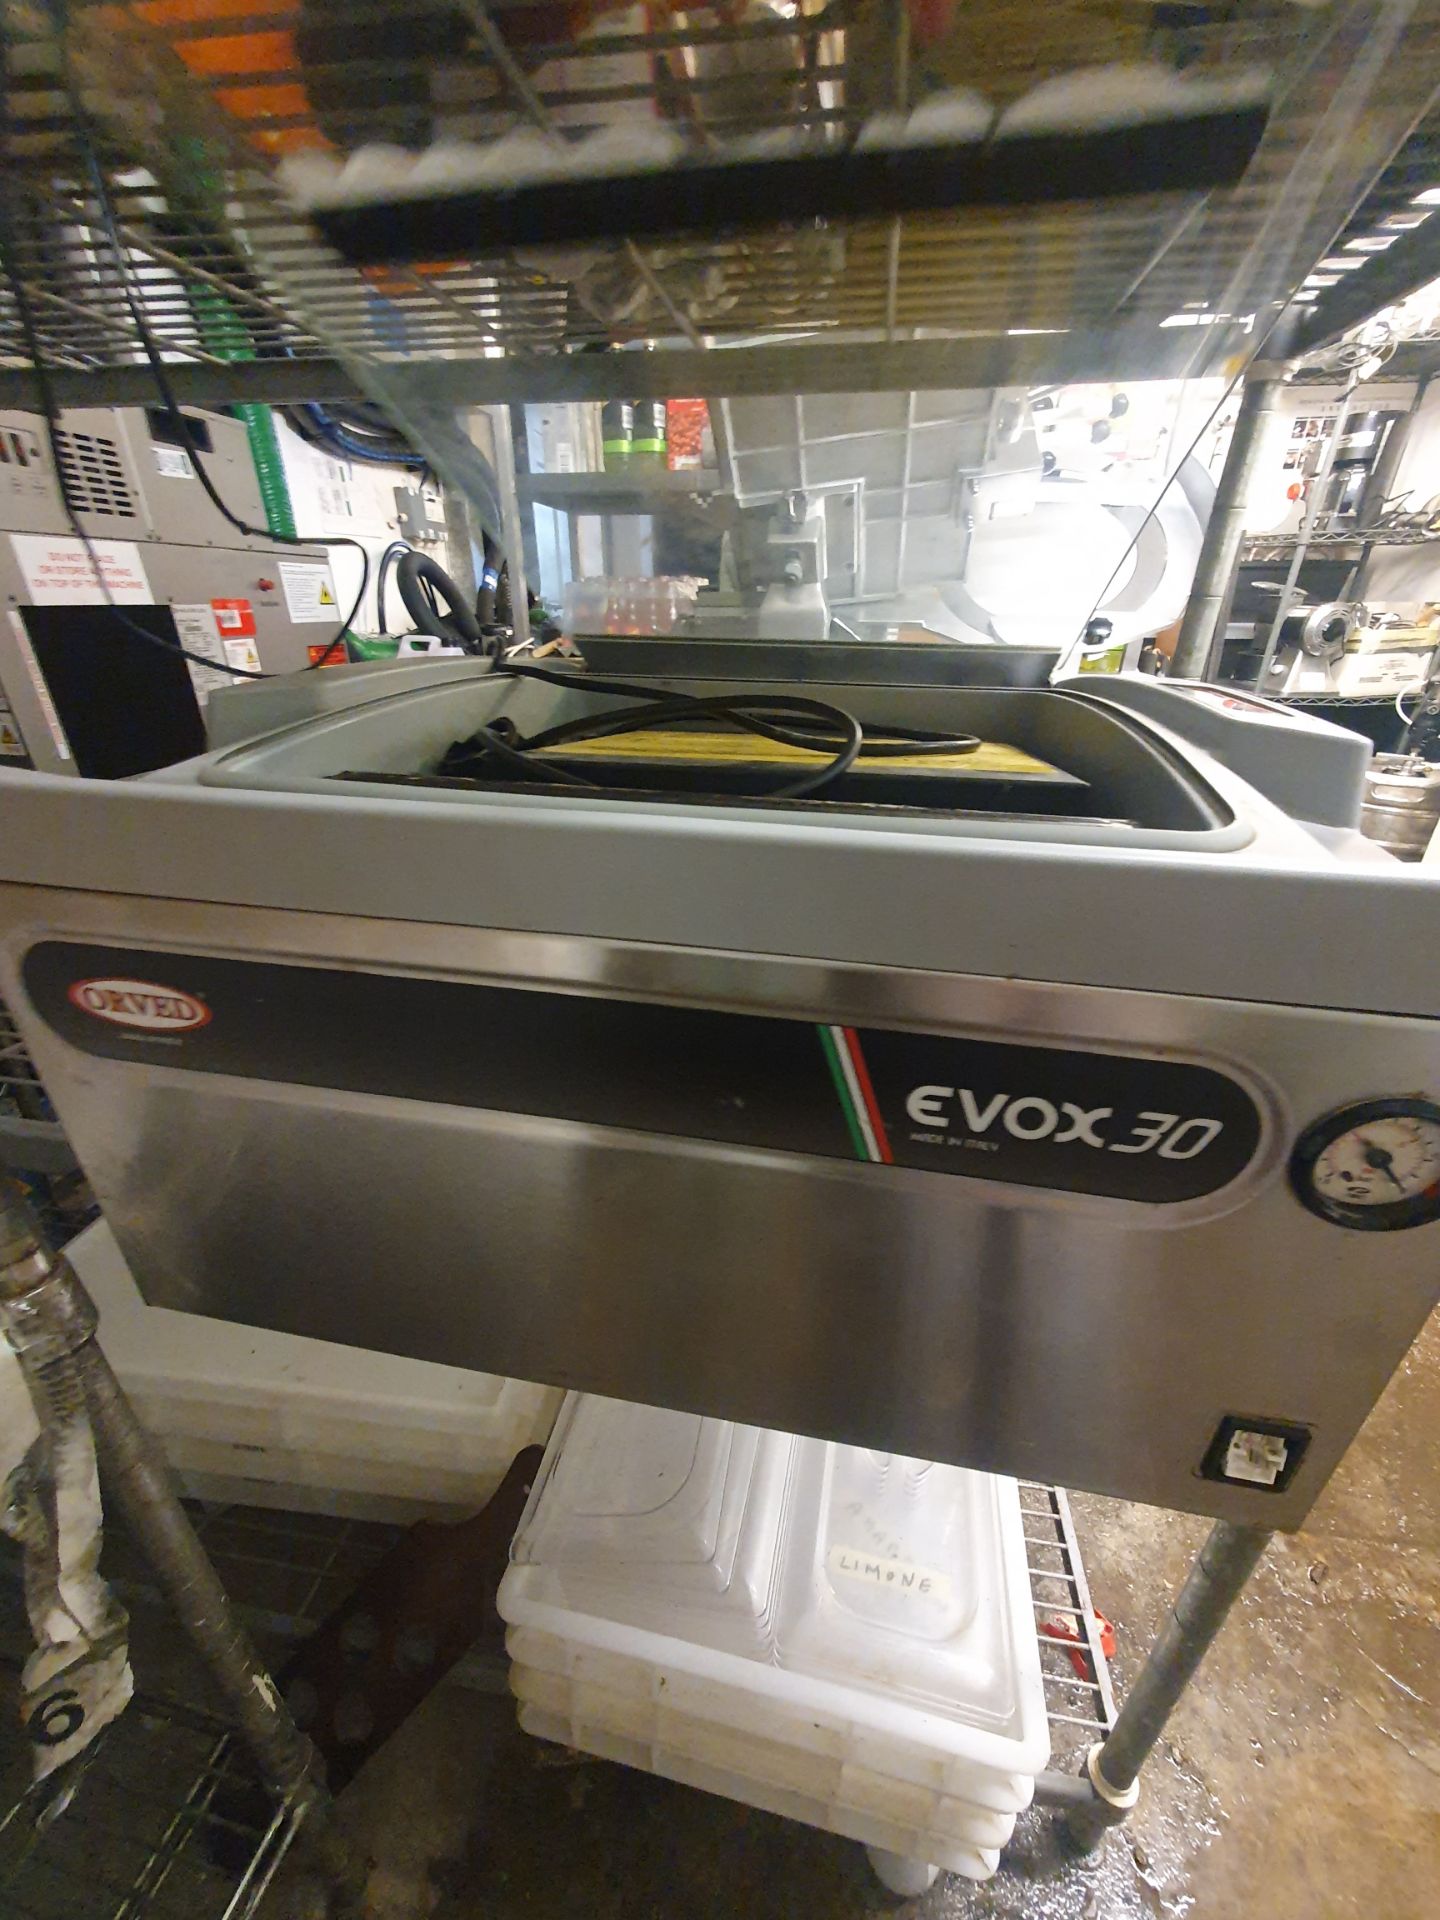 Large Chamber Vacuum Packing Machine. Orved. D. - Image 7 of 9